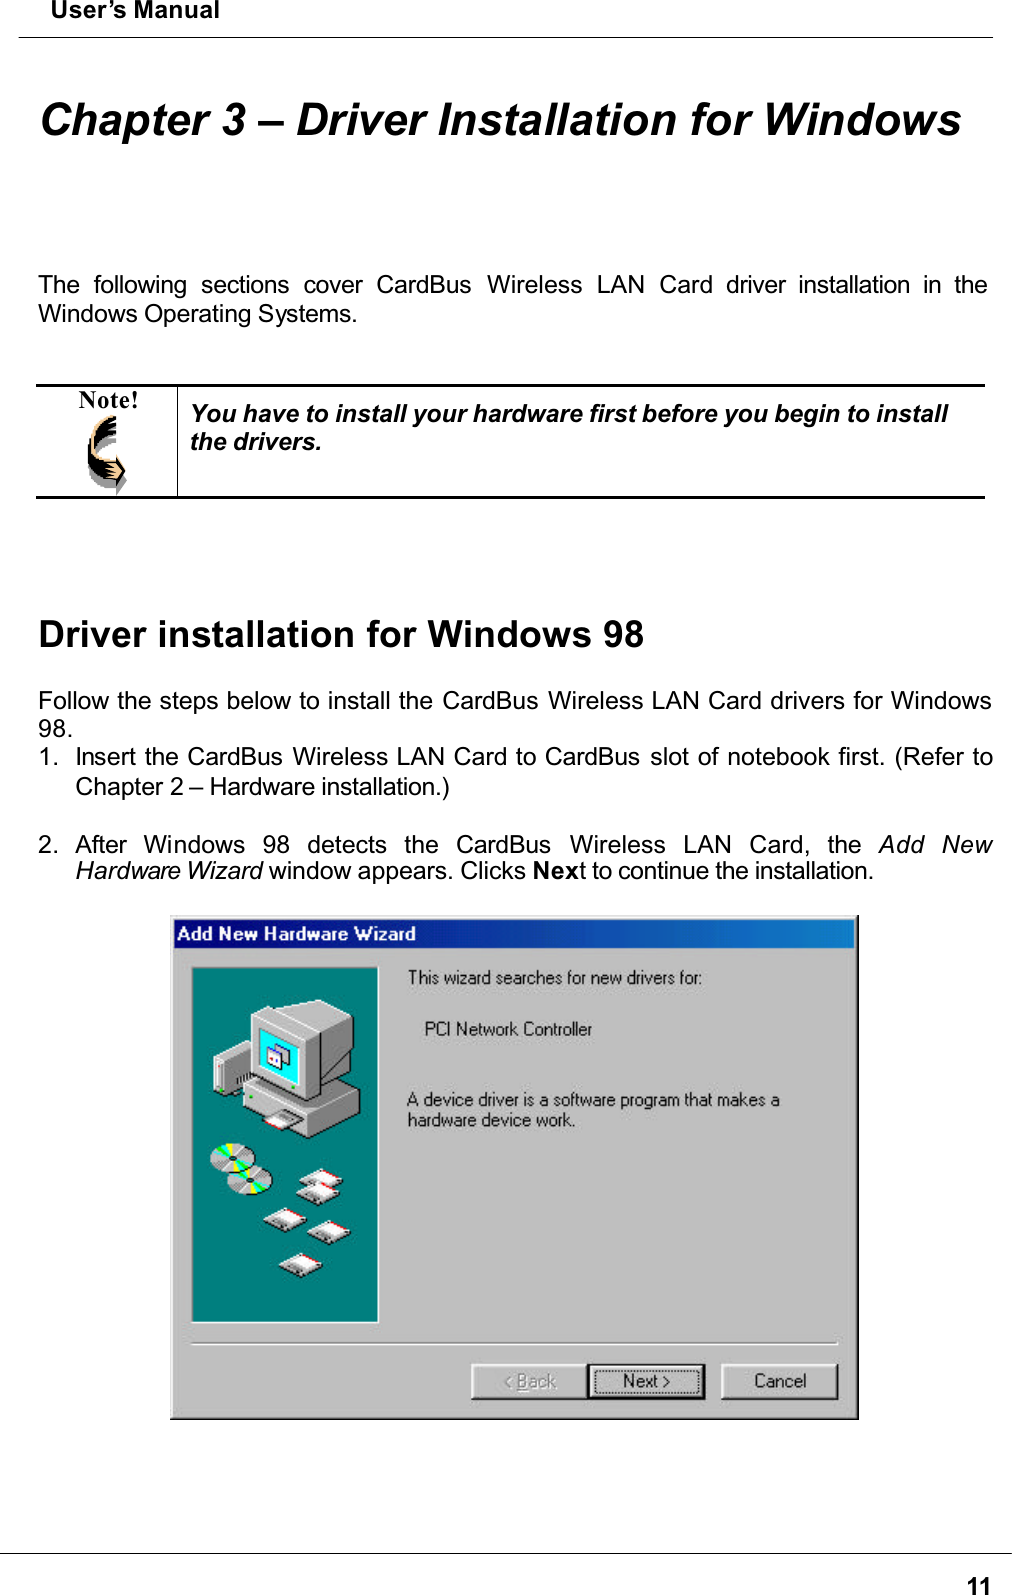  User’s Manual11Chapter 3 – Driver Installation for WindowsThe following sections cover CardBus  Wireless LAN Card driver installation in the Windows Operating Systems.Note! You have to install your hardware first before you begin to install the drivers.Driver installation for Windows 98Follow the steps below to install the CardBus Wireless LAN Card drivers for Windows 98.1. Insert the CardBus Wireless LAN Card to CardBus slot of notebook first. (Refer to Chapter 2 – Hardware installation.)2. After Windows 98 detects the CardBus  Wireless LAN Card, the Add NewHardware Wizard window appears. Clicks Next to continue the installation.